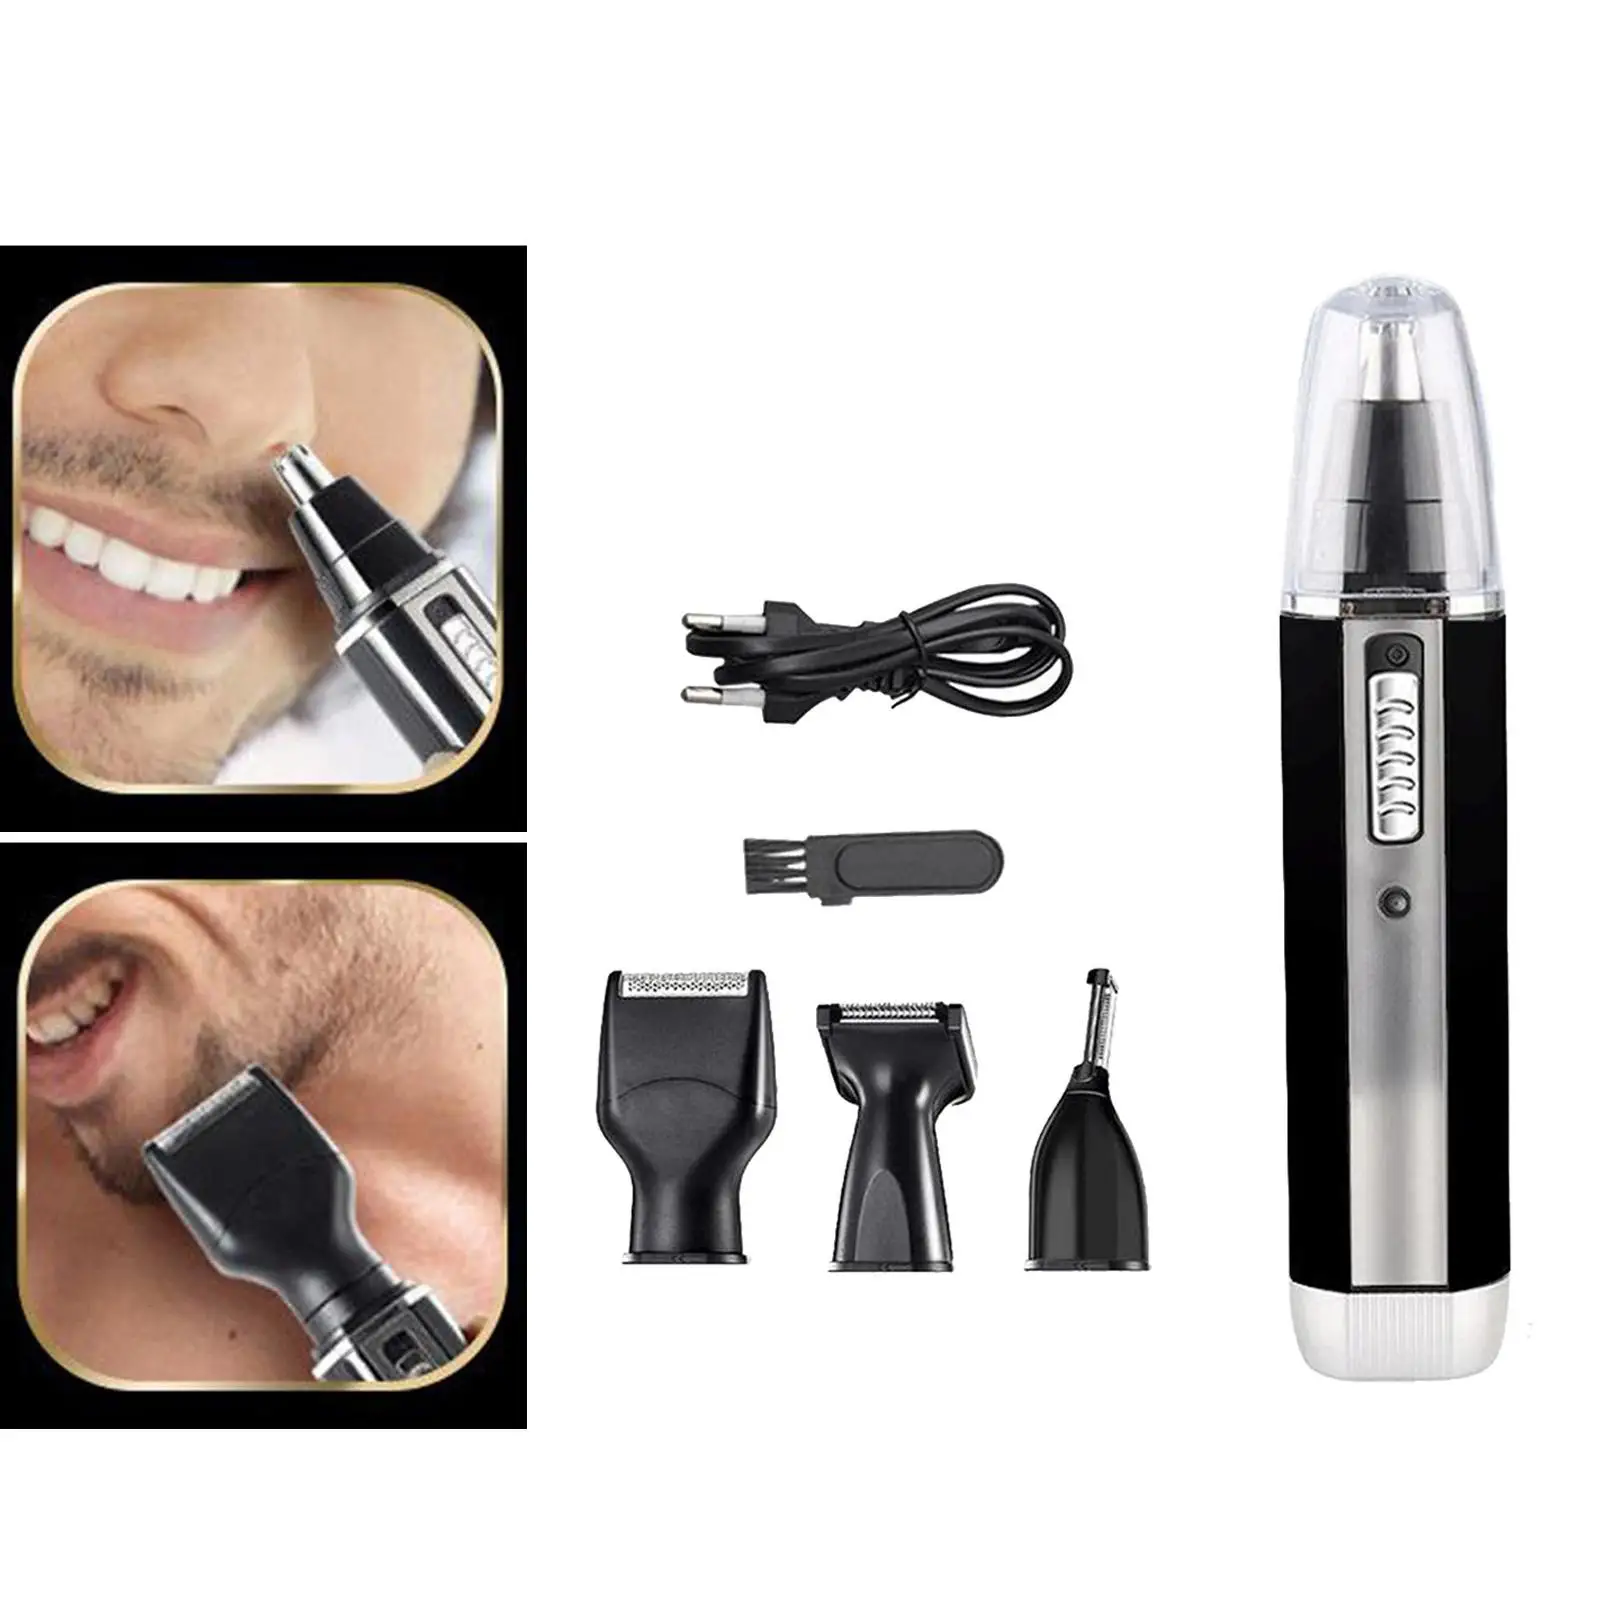 Professional 4 in 1 Travel Body Nose Ear Hair Trimmer Shaver Groomer Removal